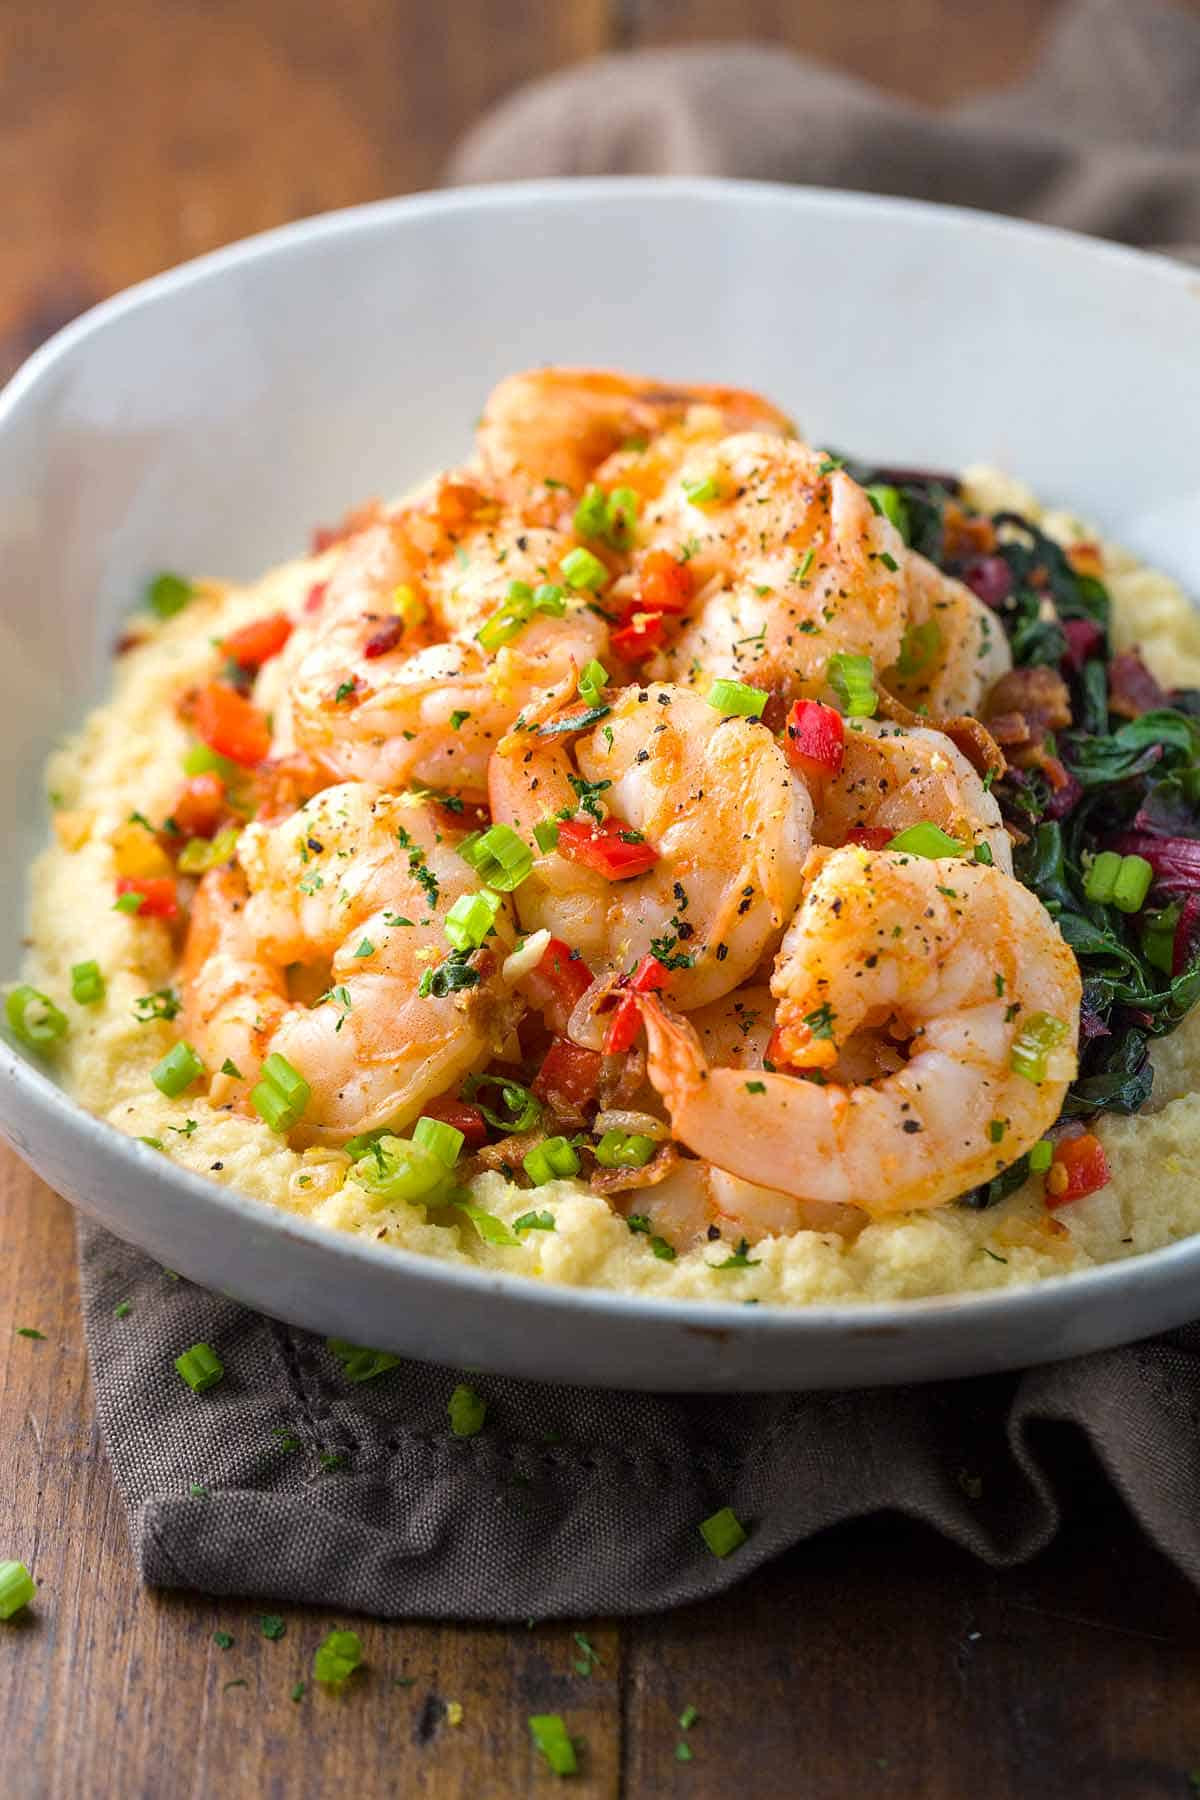 Healthy Shrimp And Grits Recipe
 Creamy Cauliflower Grits with Spicy Shrimp Recipe